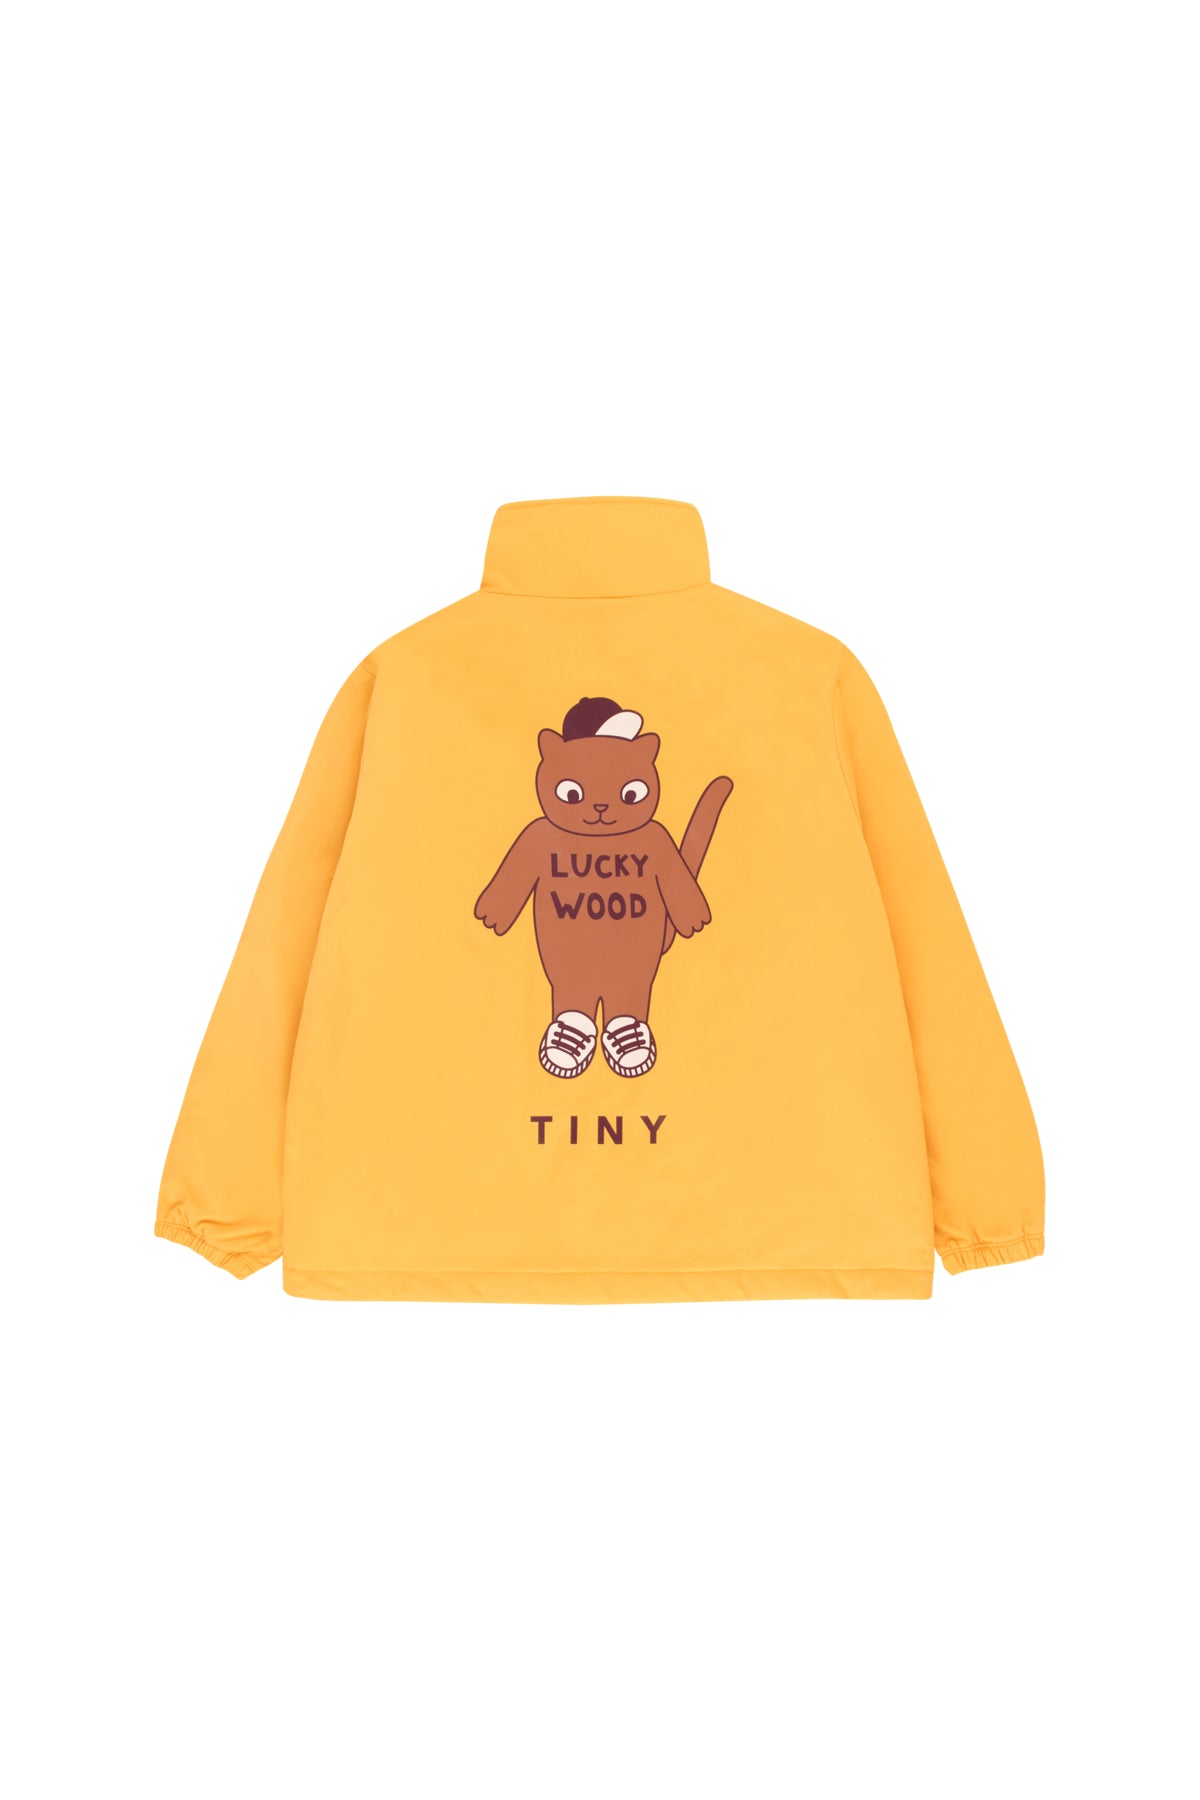 CATS jacket yellow/brown